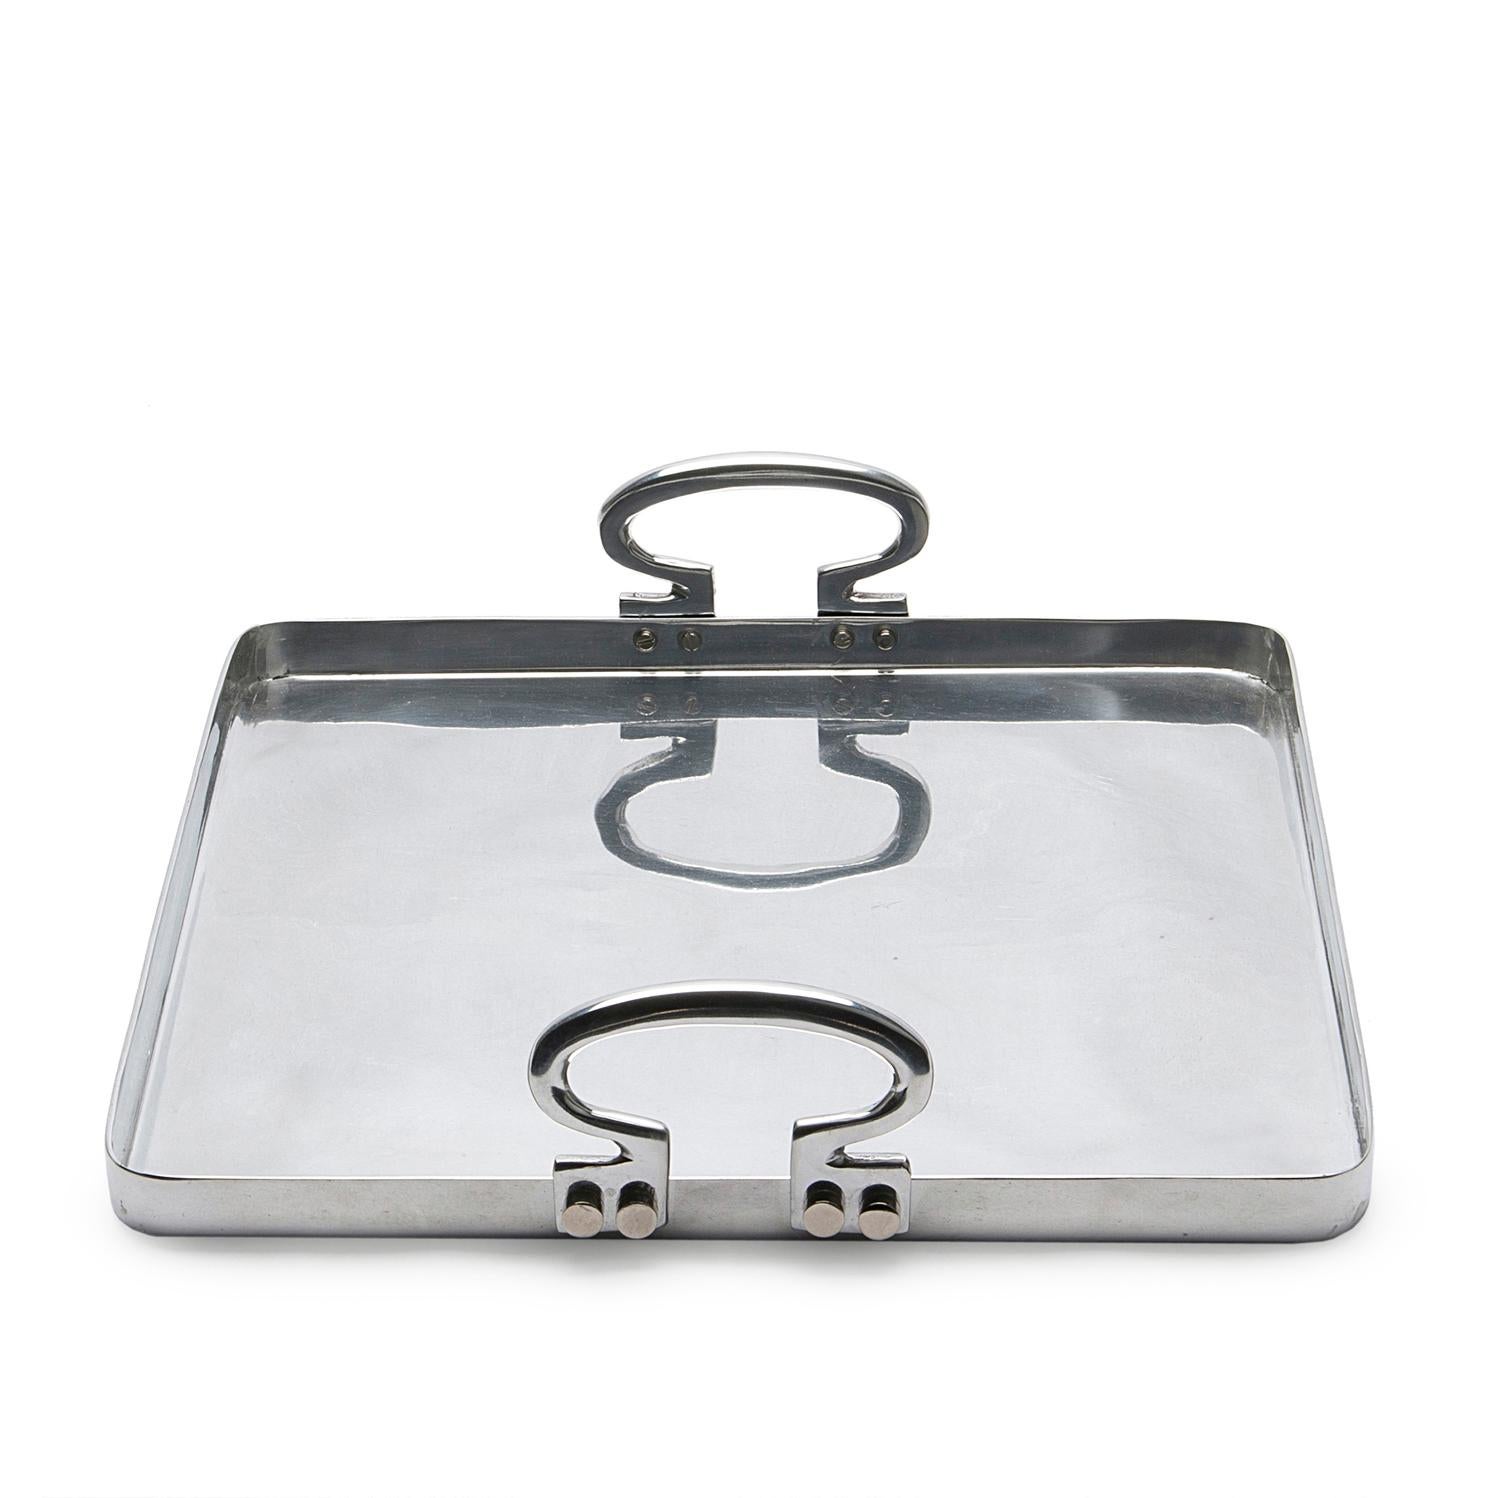 Colony is a polished aluminium tray designed by Aldo Cibic. The square silhouette is minimalist, but the rounded corners and the sinuous handles give to the object a warm and refined look. Colony is perfect on any occasion to serve drinks or food